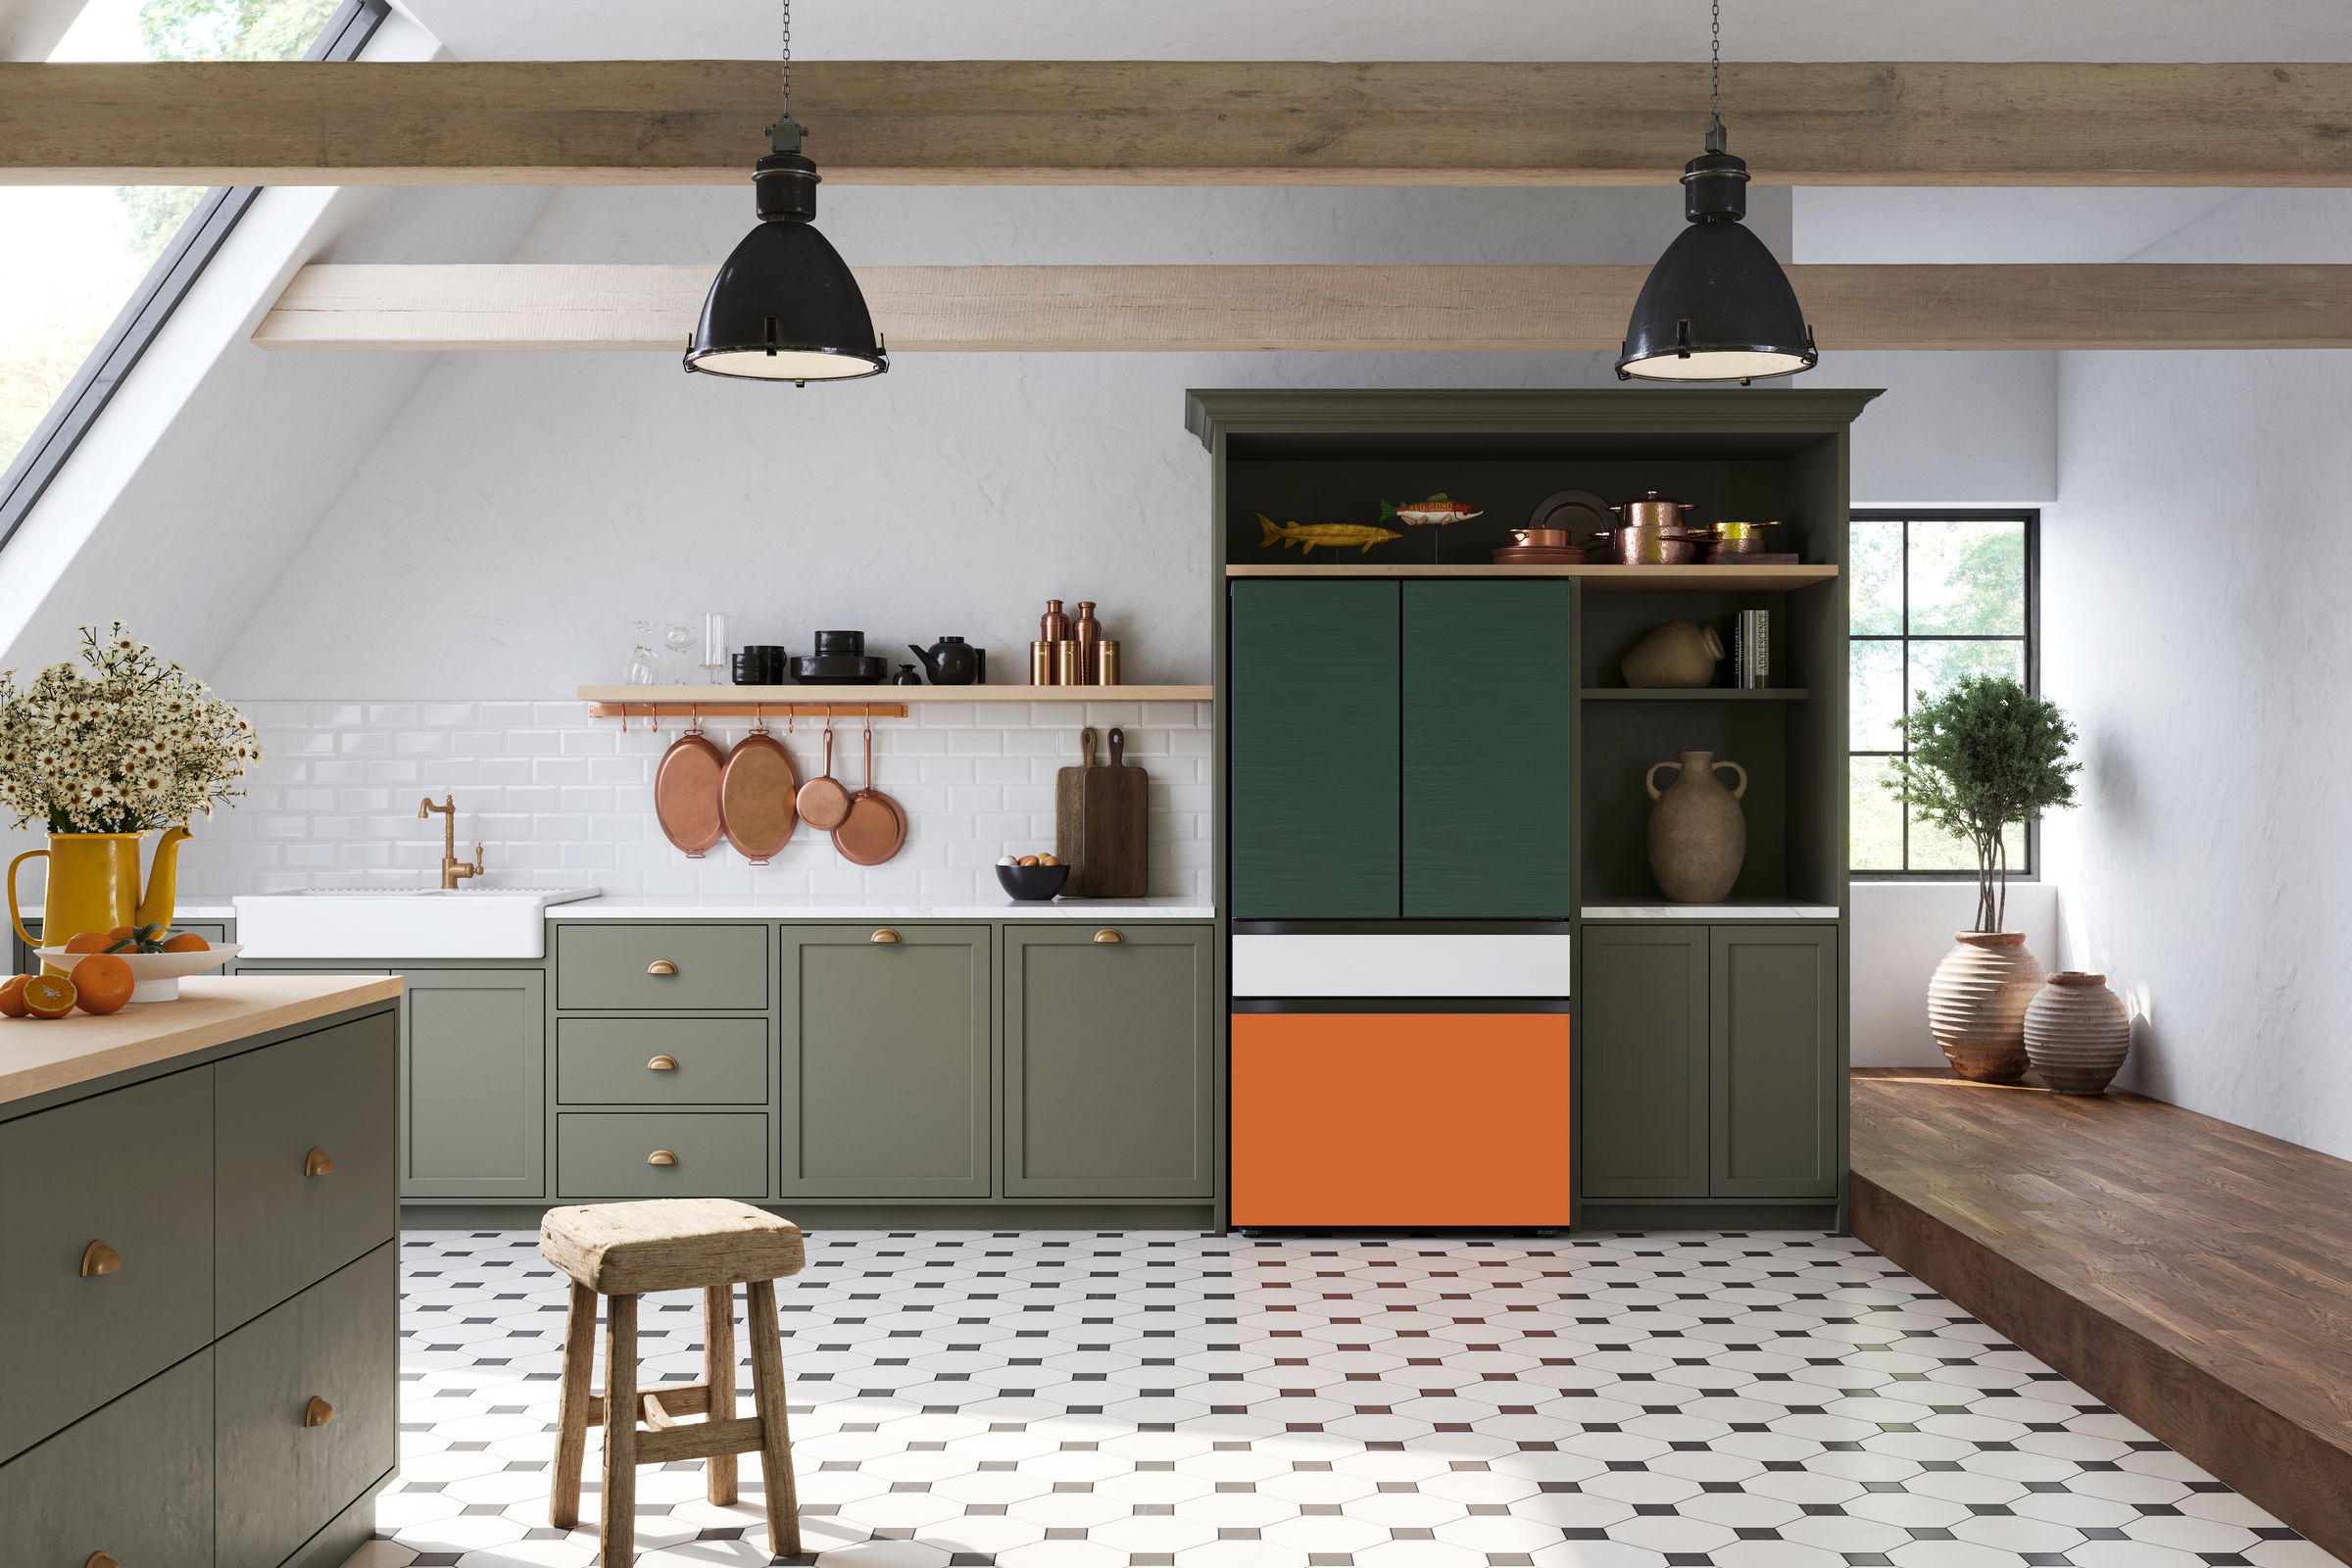 Jazz up your smart fridge in combination of 12 colors and two finishes. Glass finishes are available in sunrise yellow, clementine, morning blue, pink, charcoal, gray, and white glass. Metallic options are emerald green, navy, matte black, tuscan, and regular old stainless steel. 